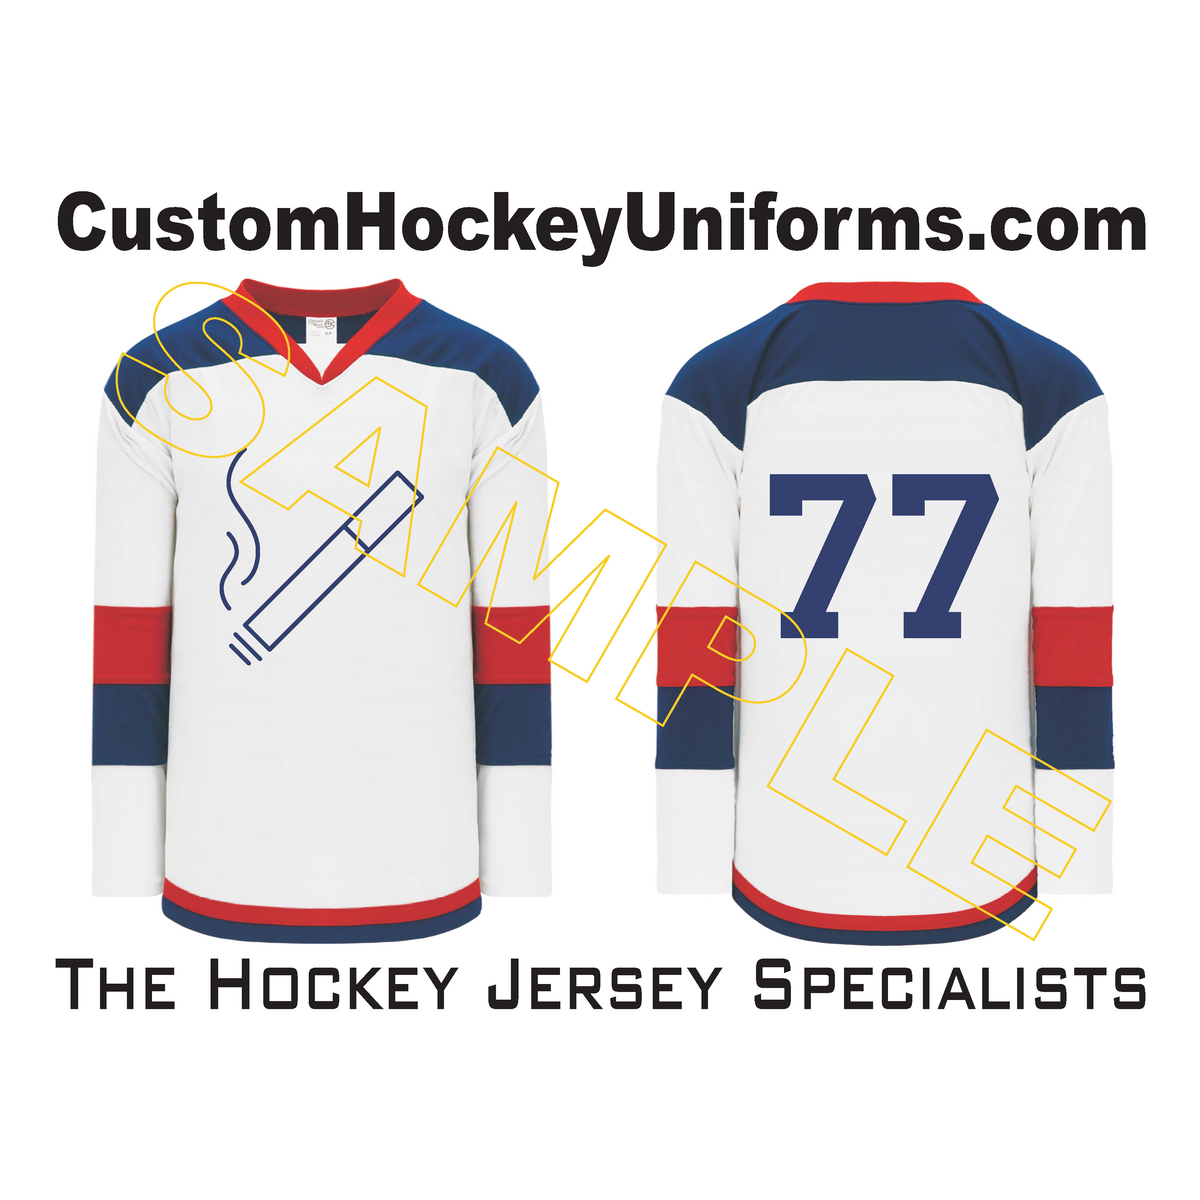 H7400-765 White/Navy/Red League Style Blank Hockey Jerseys Adult Small